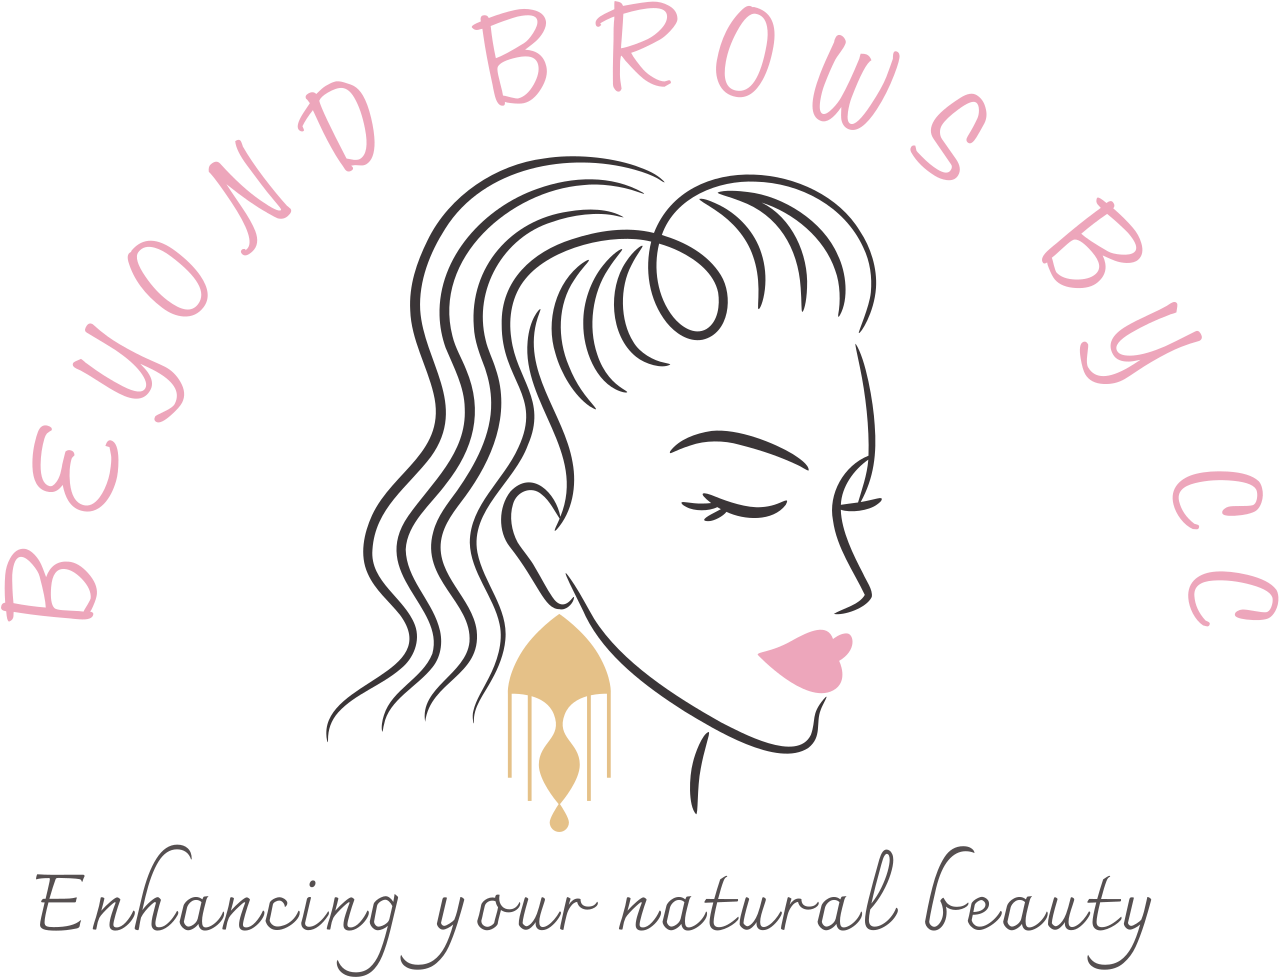 Beyond Brows online shop's web page